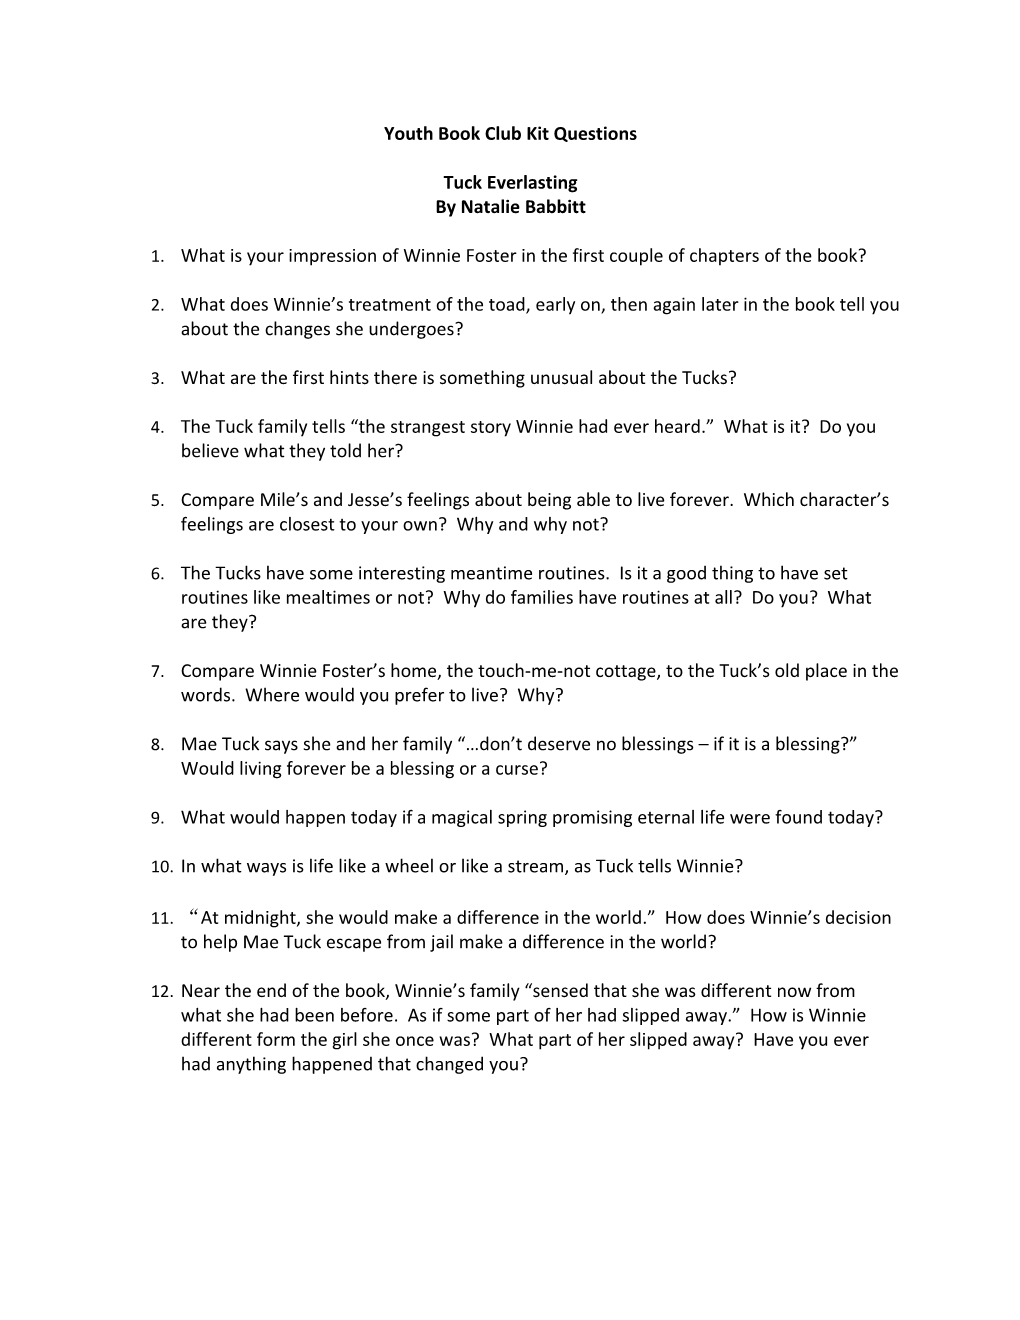 Youth Book Club Kit Questions s3